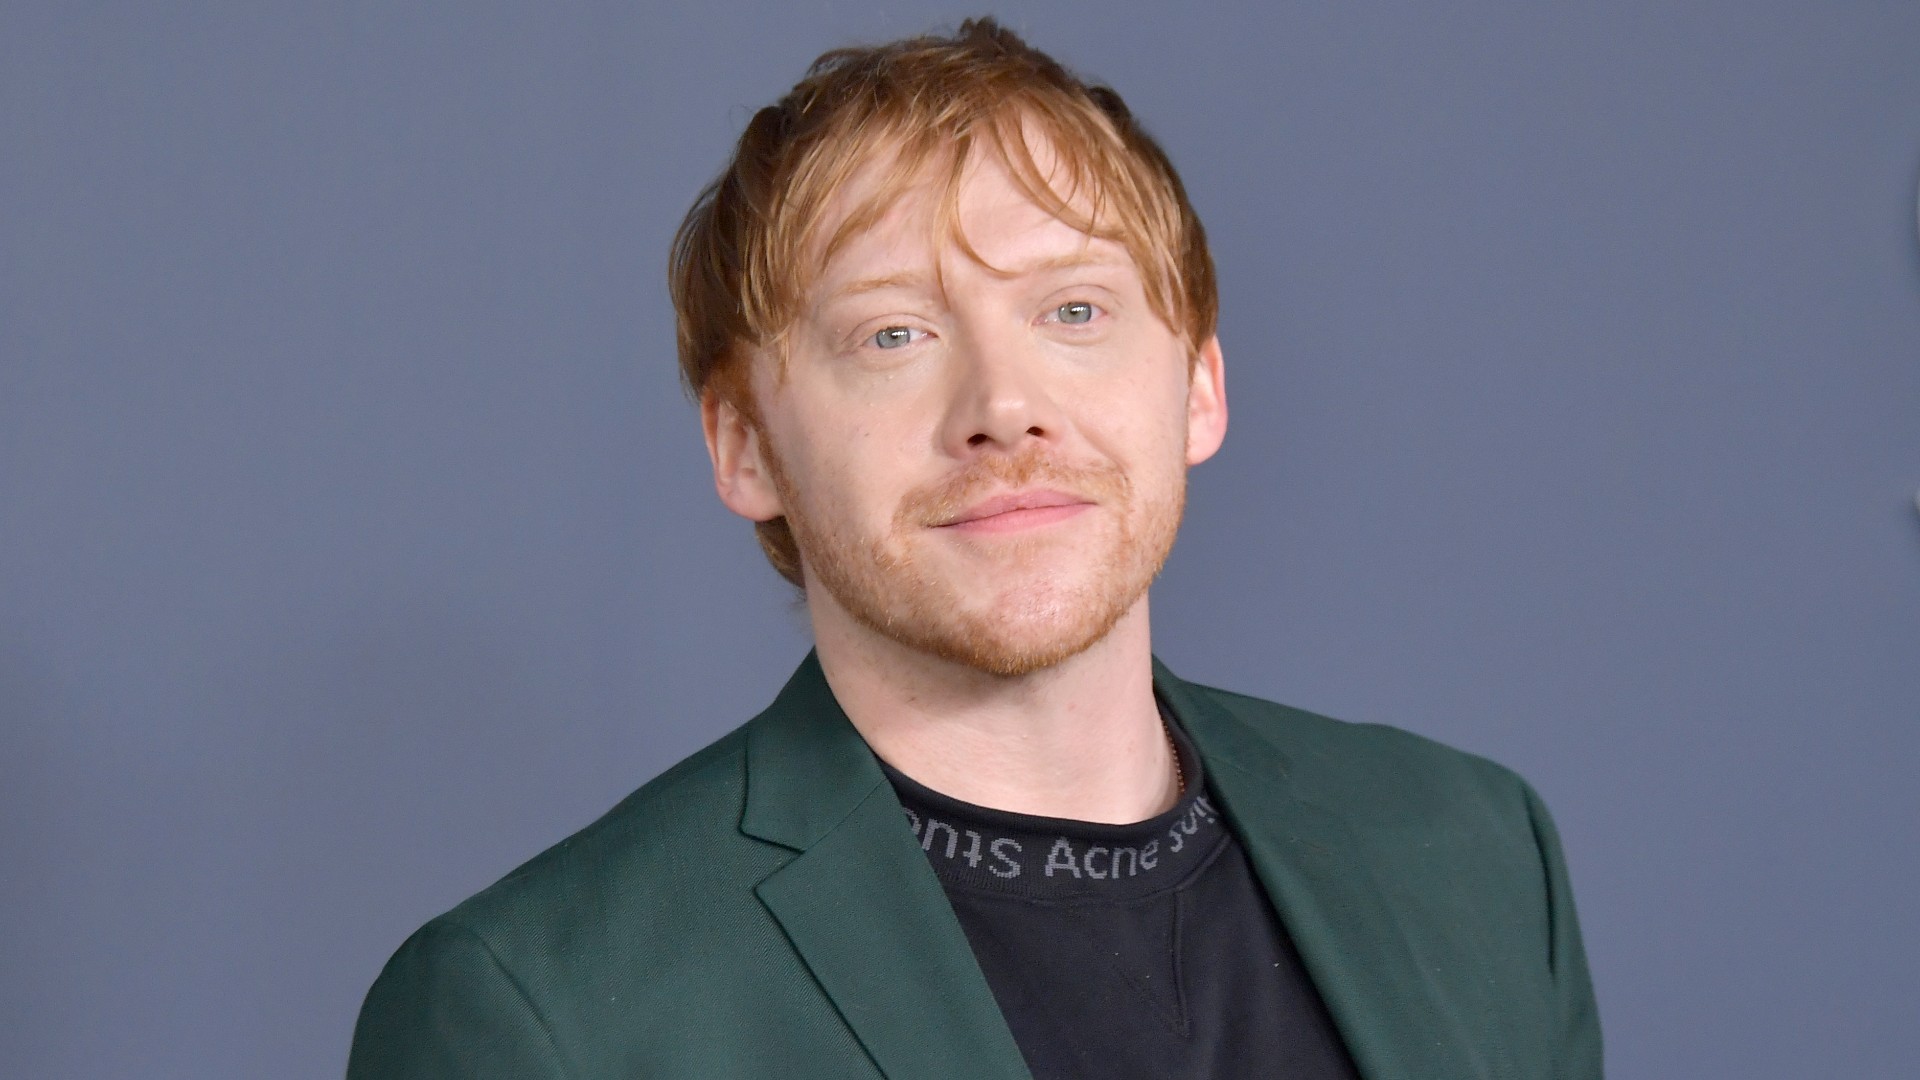 Casting News: 'Harry Potter' Actor Rupert Grint Joins Horror Anthology Series 'Guillermo del Toro's Cabinet of Curiosities'